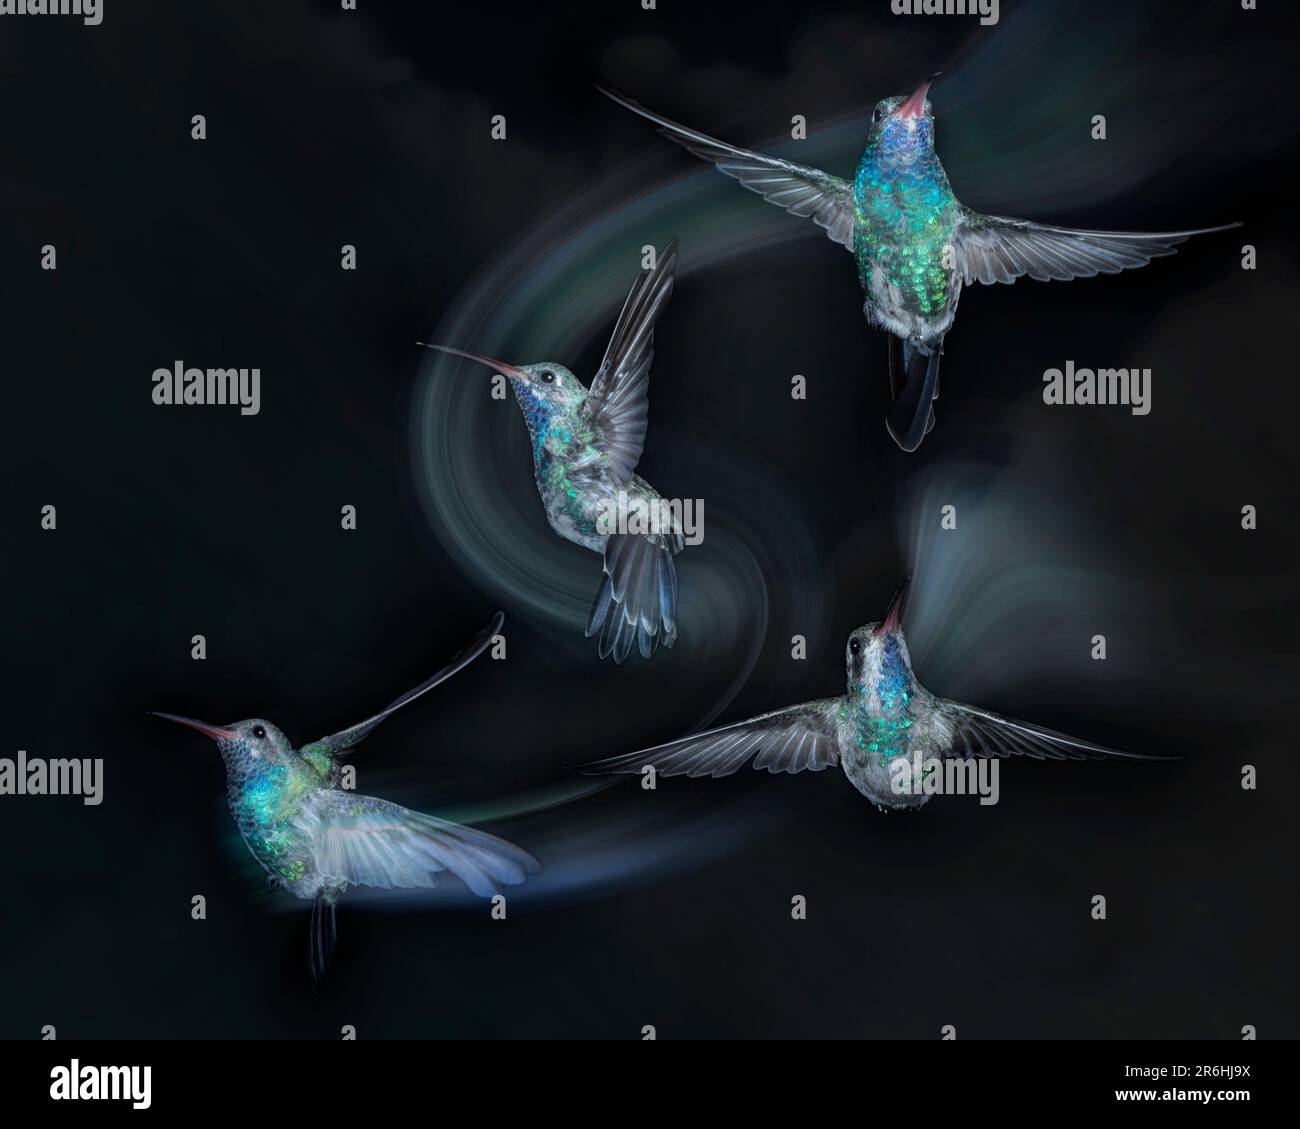 Group of 4 broad billed hummingbirds in flight with a motion blur on a black background Stock Photo